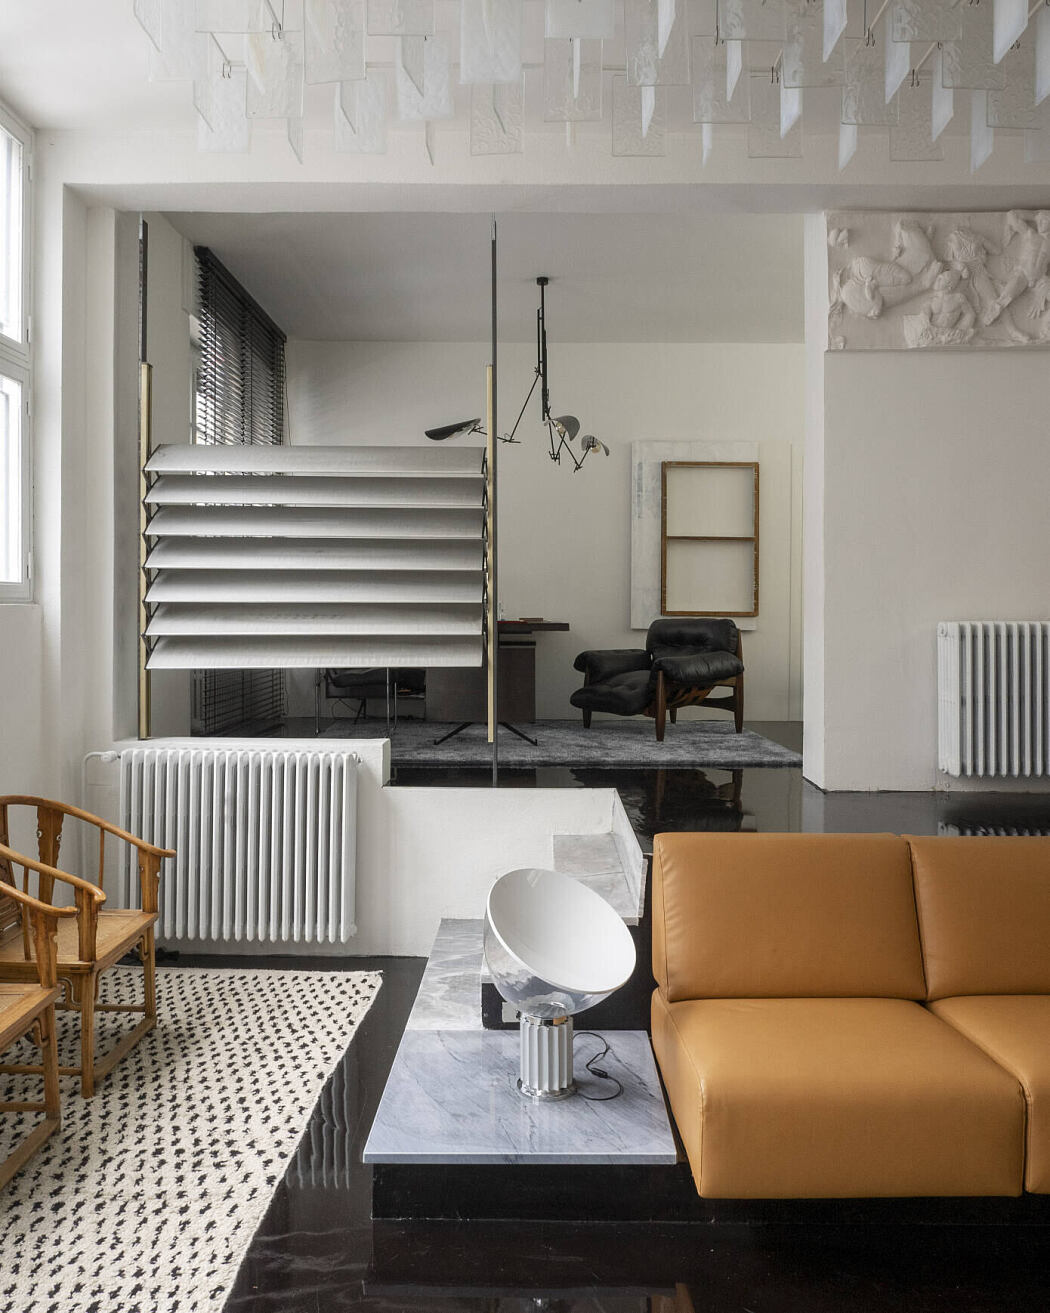 Atelier Apartment by Hannes Peer Architecture